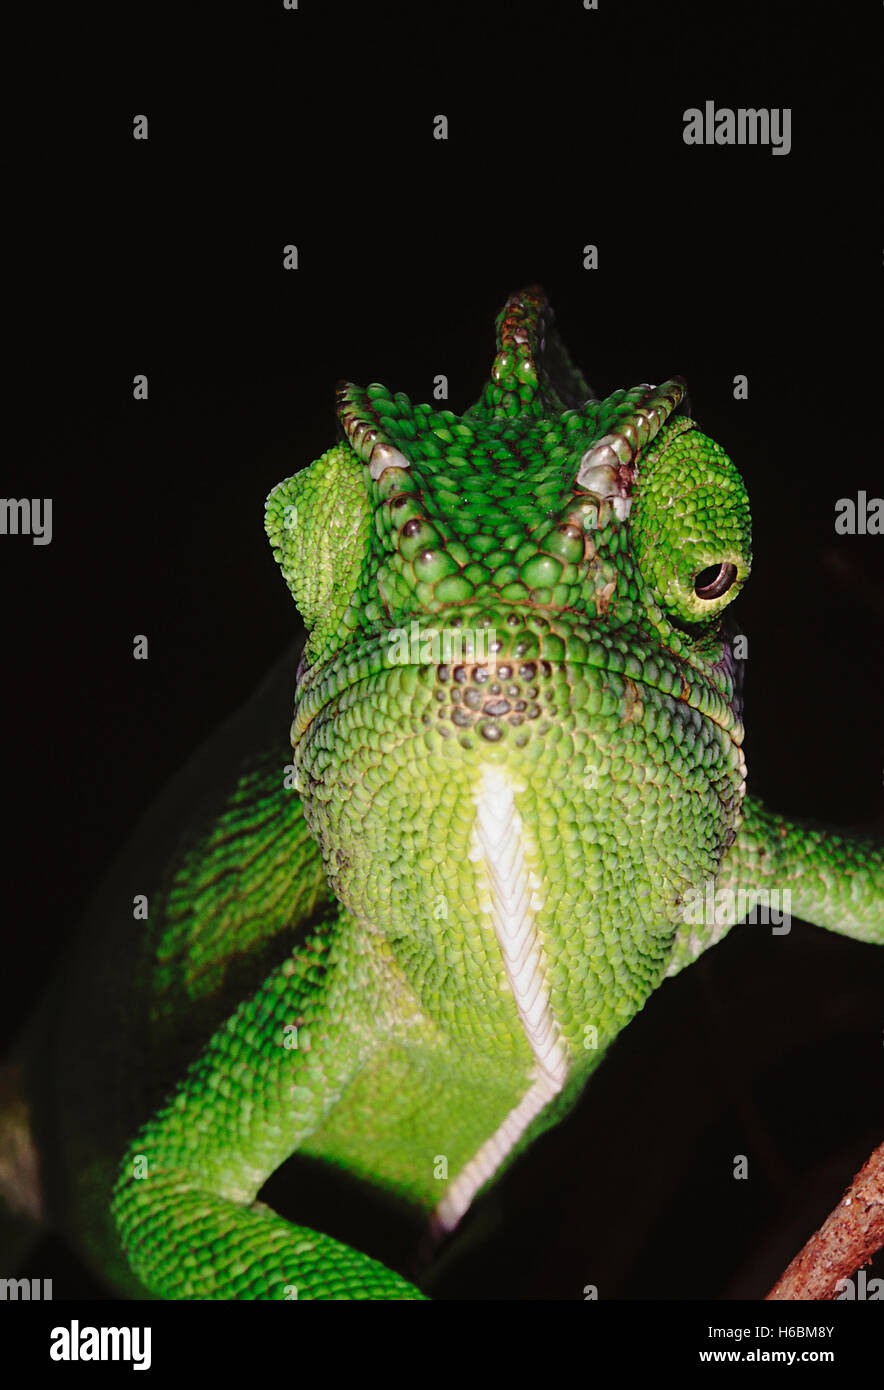 The chameleon has the ability to change its colour as well as shade depending on its mood and surroundings. Chameleon Zeylanicus Stock Photo